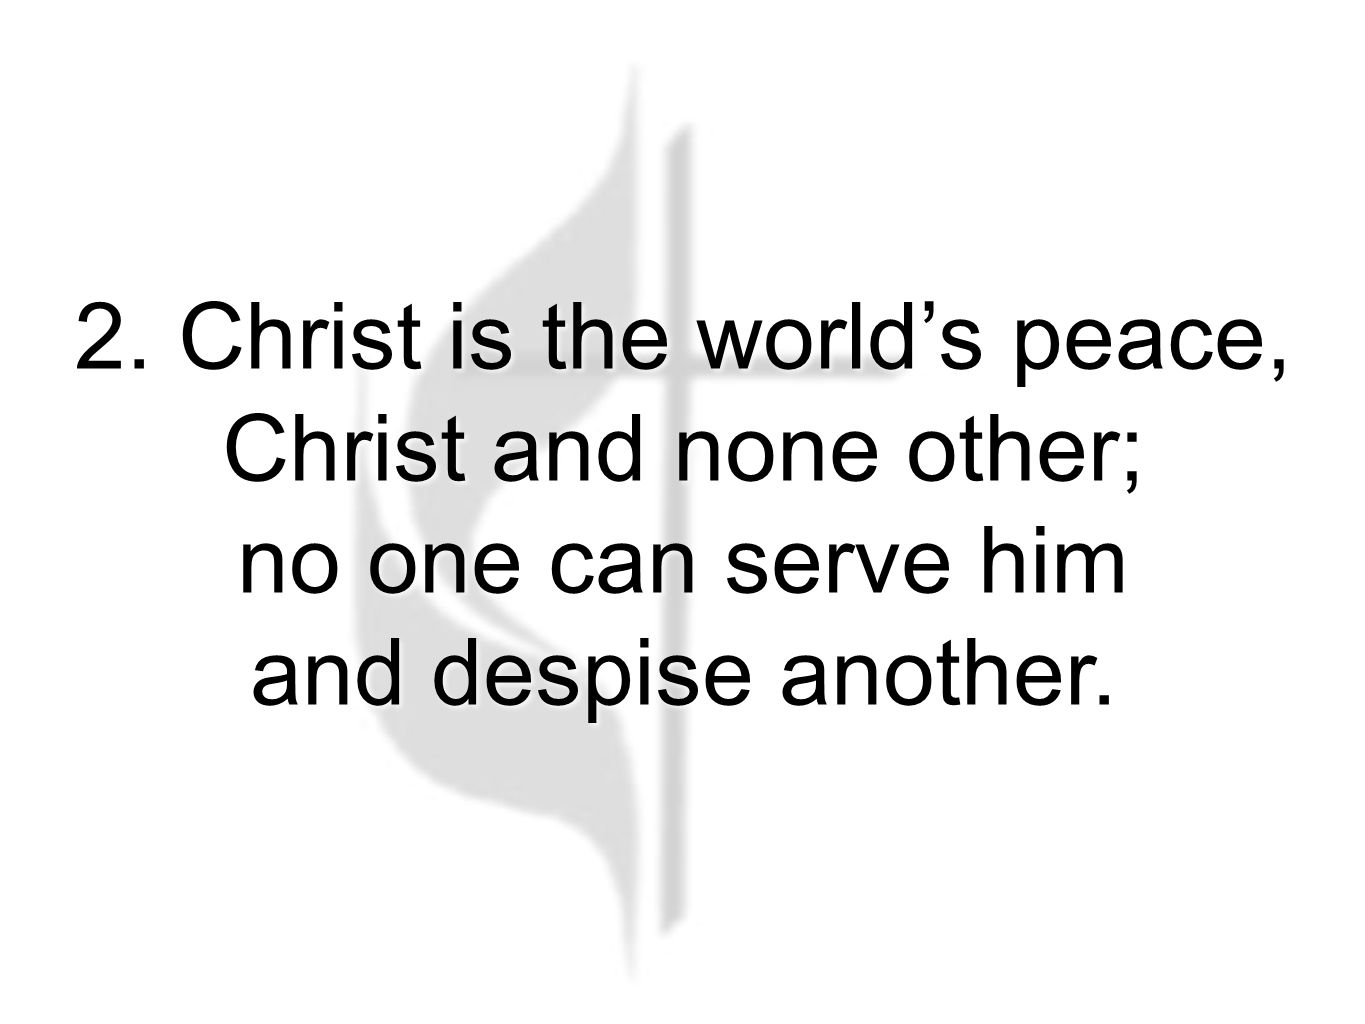 2. Christ is the world’s peace, Christ and none other; no one can serve him and despise another.